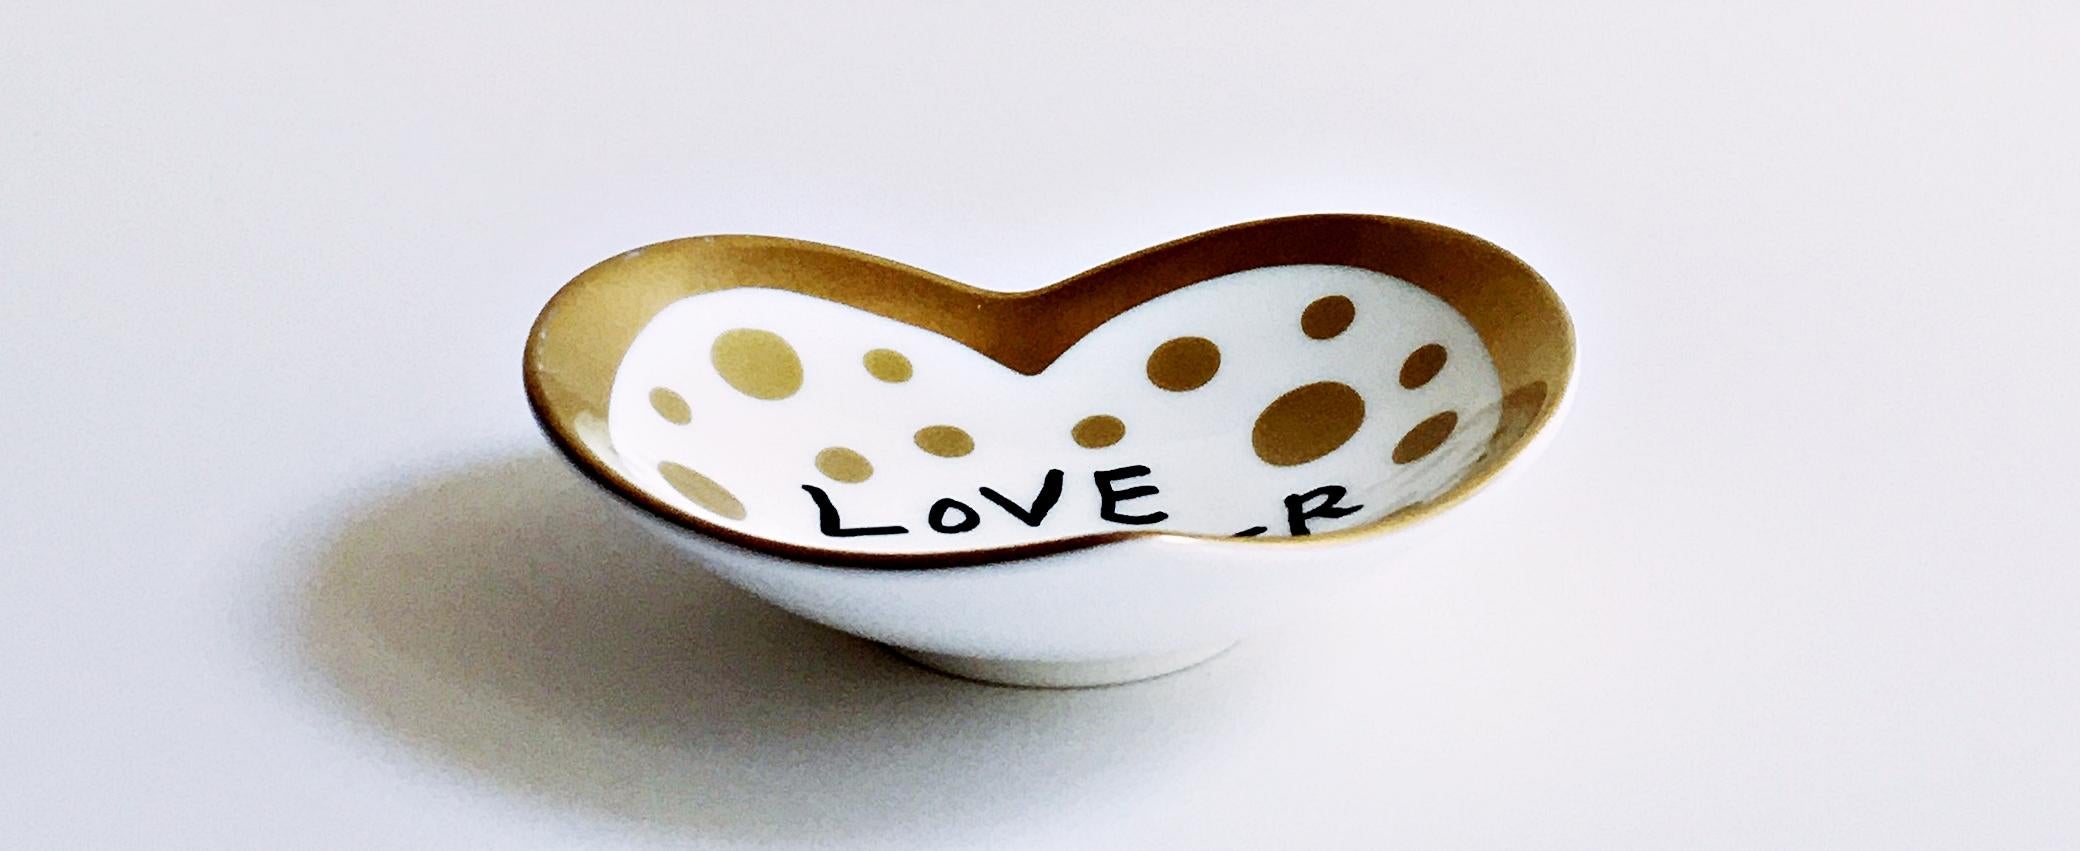 Love Forever Porcelain Bowl VIP Gold Edition Limited Edition for Ginza 6 opening - Pop Art Art by Yayoi Kusama